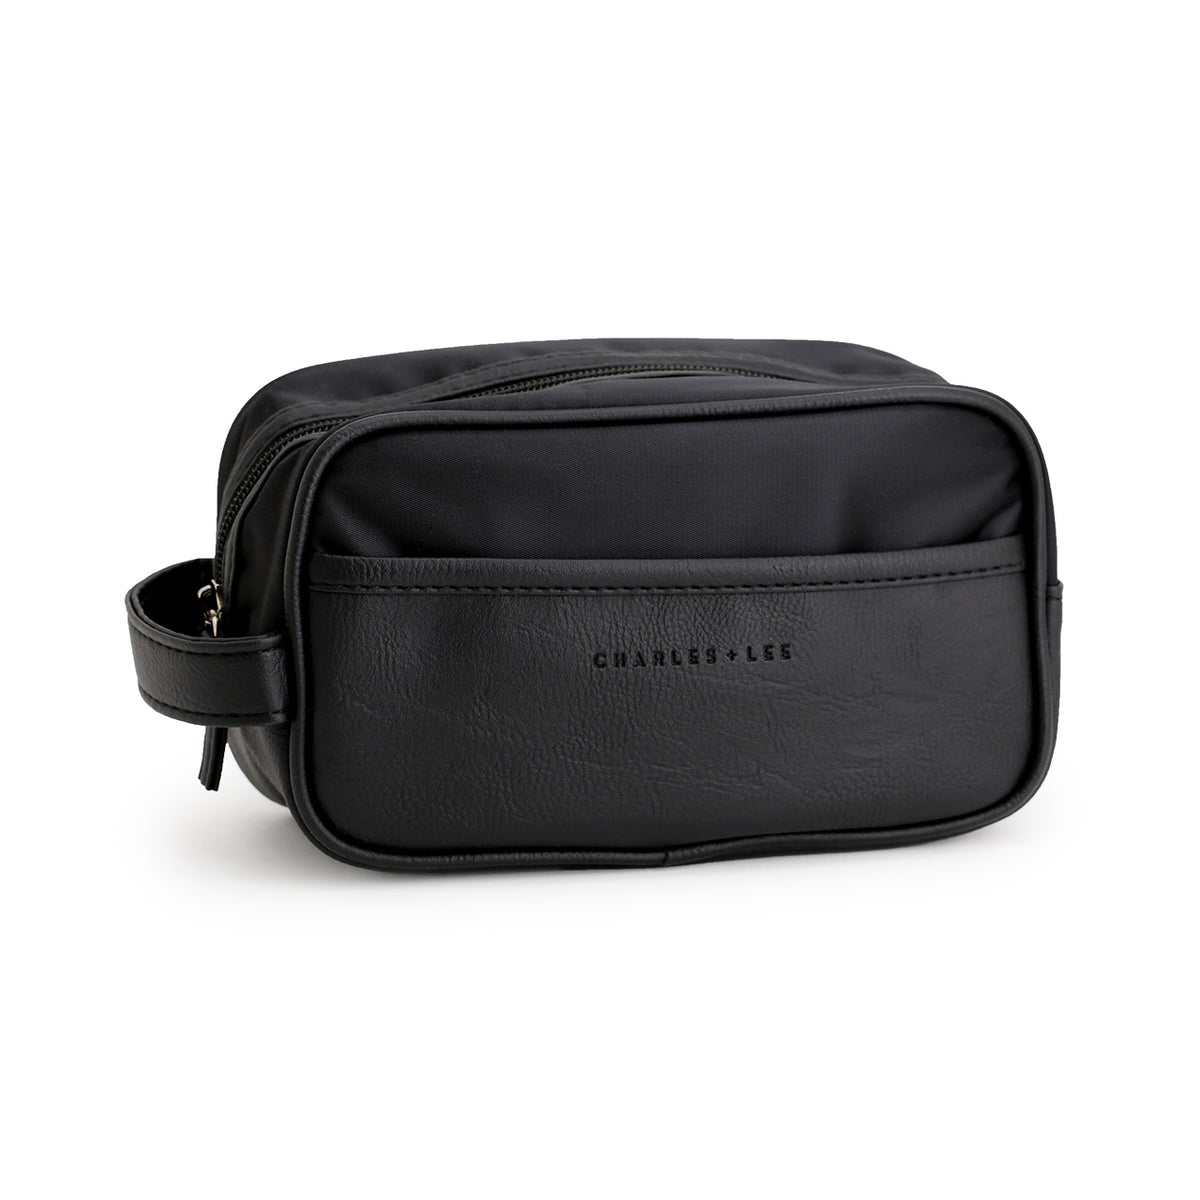 Black travel kit dopp bag made from water resistant nylon and PU Leather